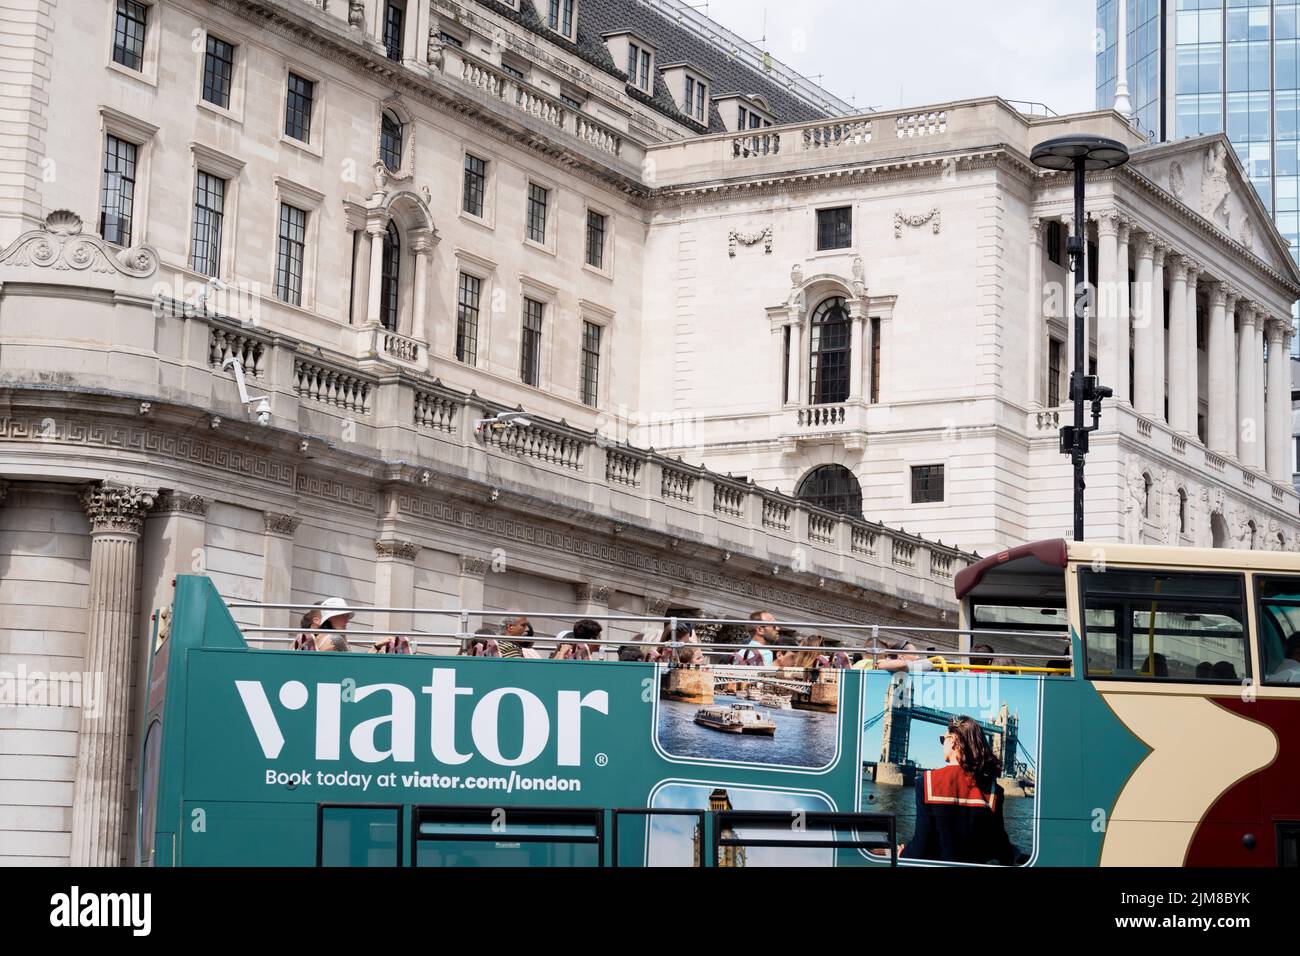 On the day that the Bank of England announced a rise, from 1.25% to 1.75% in the interest rate, the highest increase in 27 years, a tour bus and tourists drives past an exterior of the Bank of England, on 4th August 2022, in the City of London, England. This increase is widely seen as a slide towards inflation with a shrinking of the UK economy - the start of its fall into recession in the third financial quarter of 2022. Stock Photo